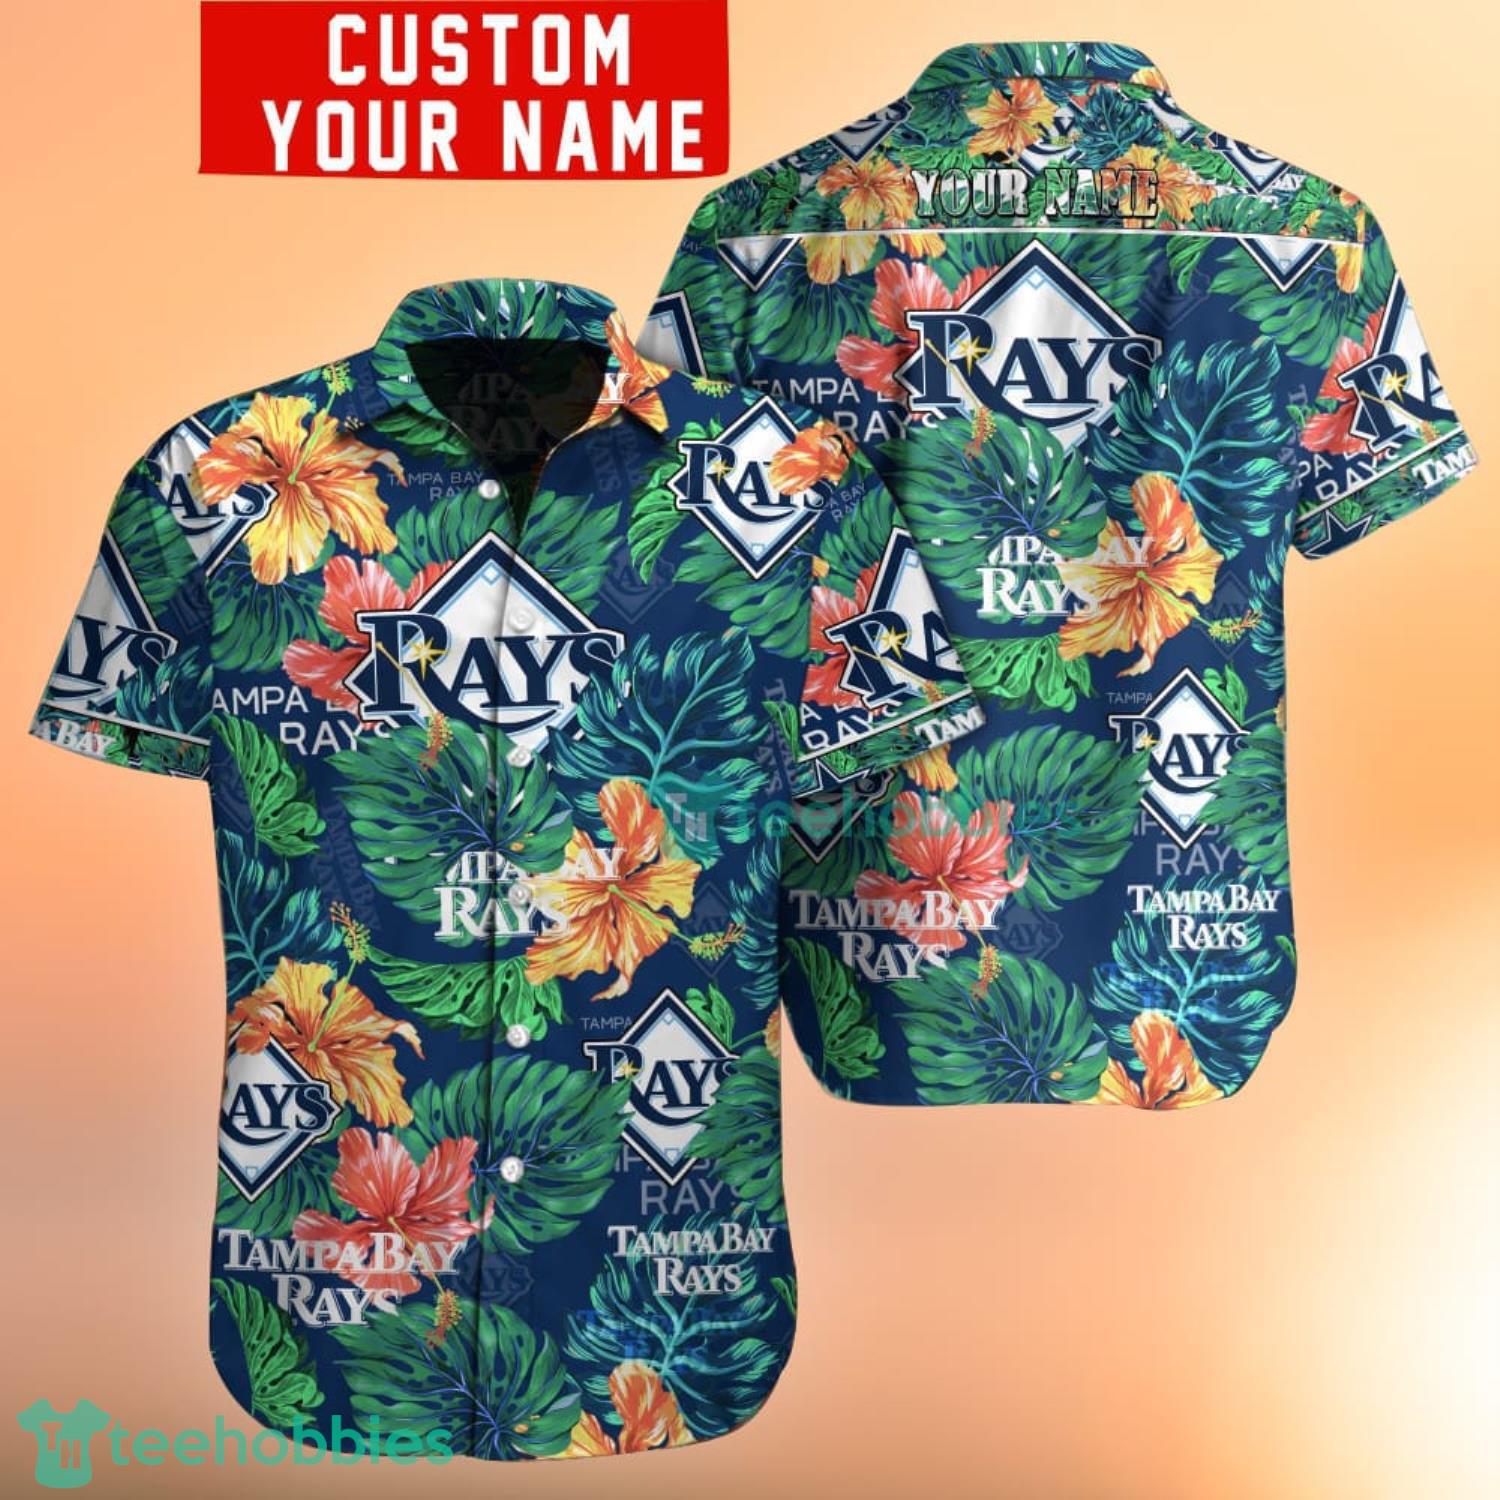 Customized Tampa Bay Rays Jersey, Personalized Rays Apparel